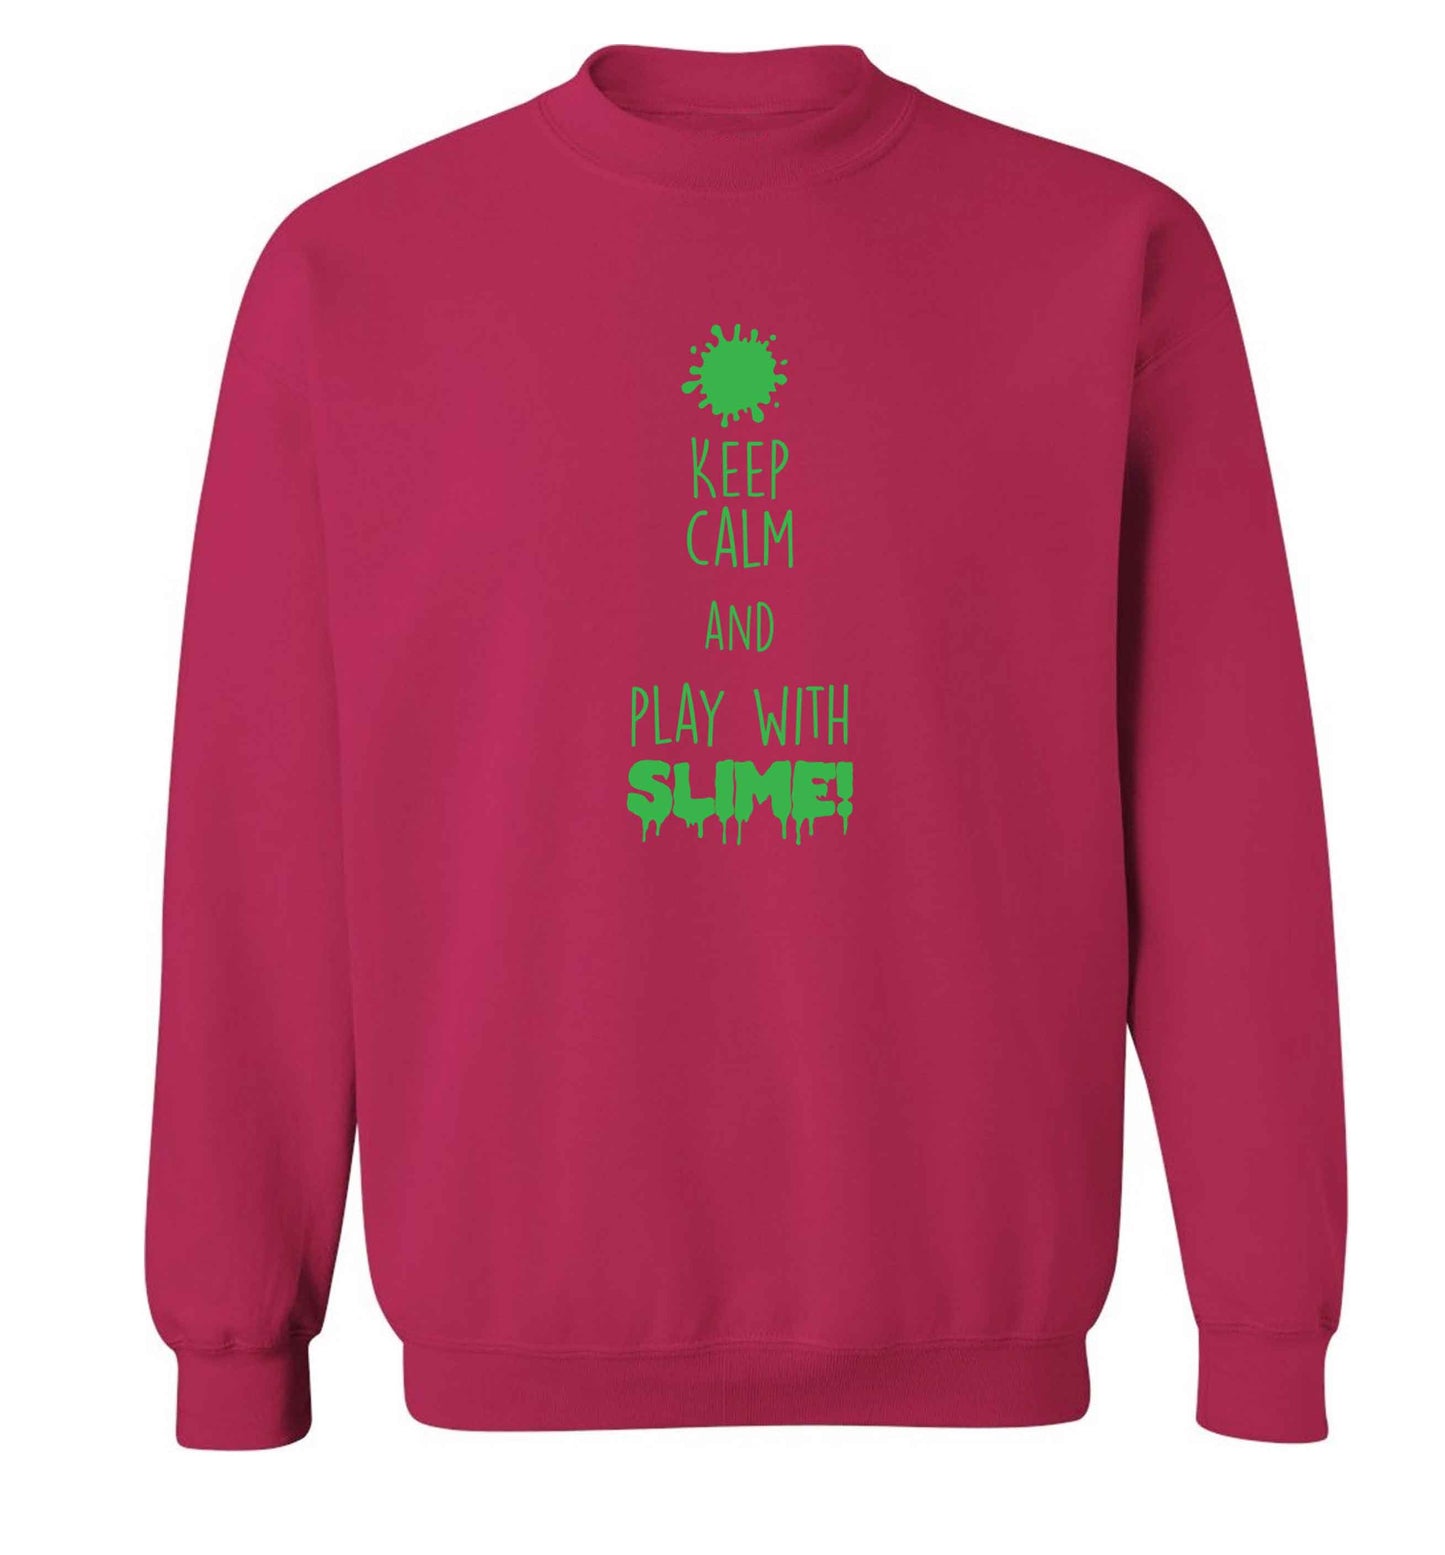 Neon green keep calm and play with slime!adult's unisex pink sweater 2XL